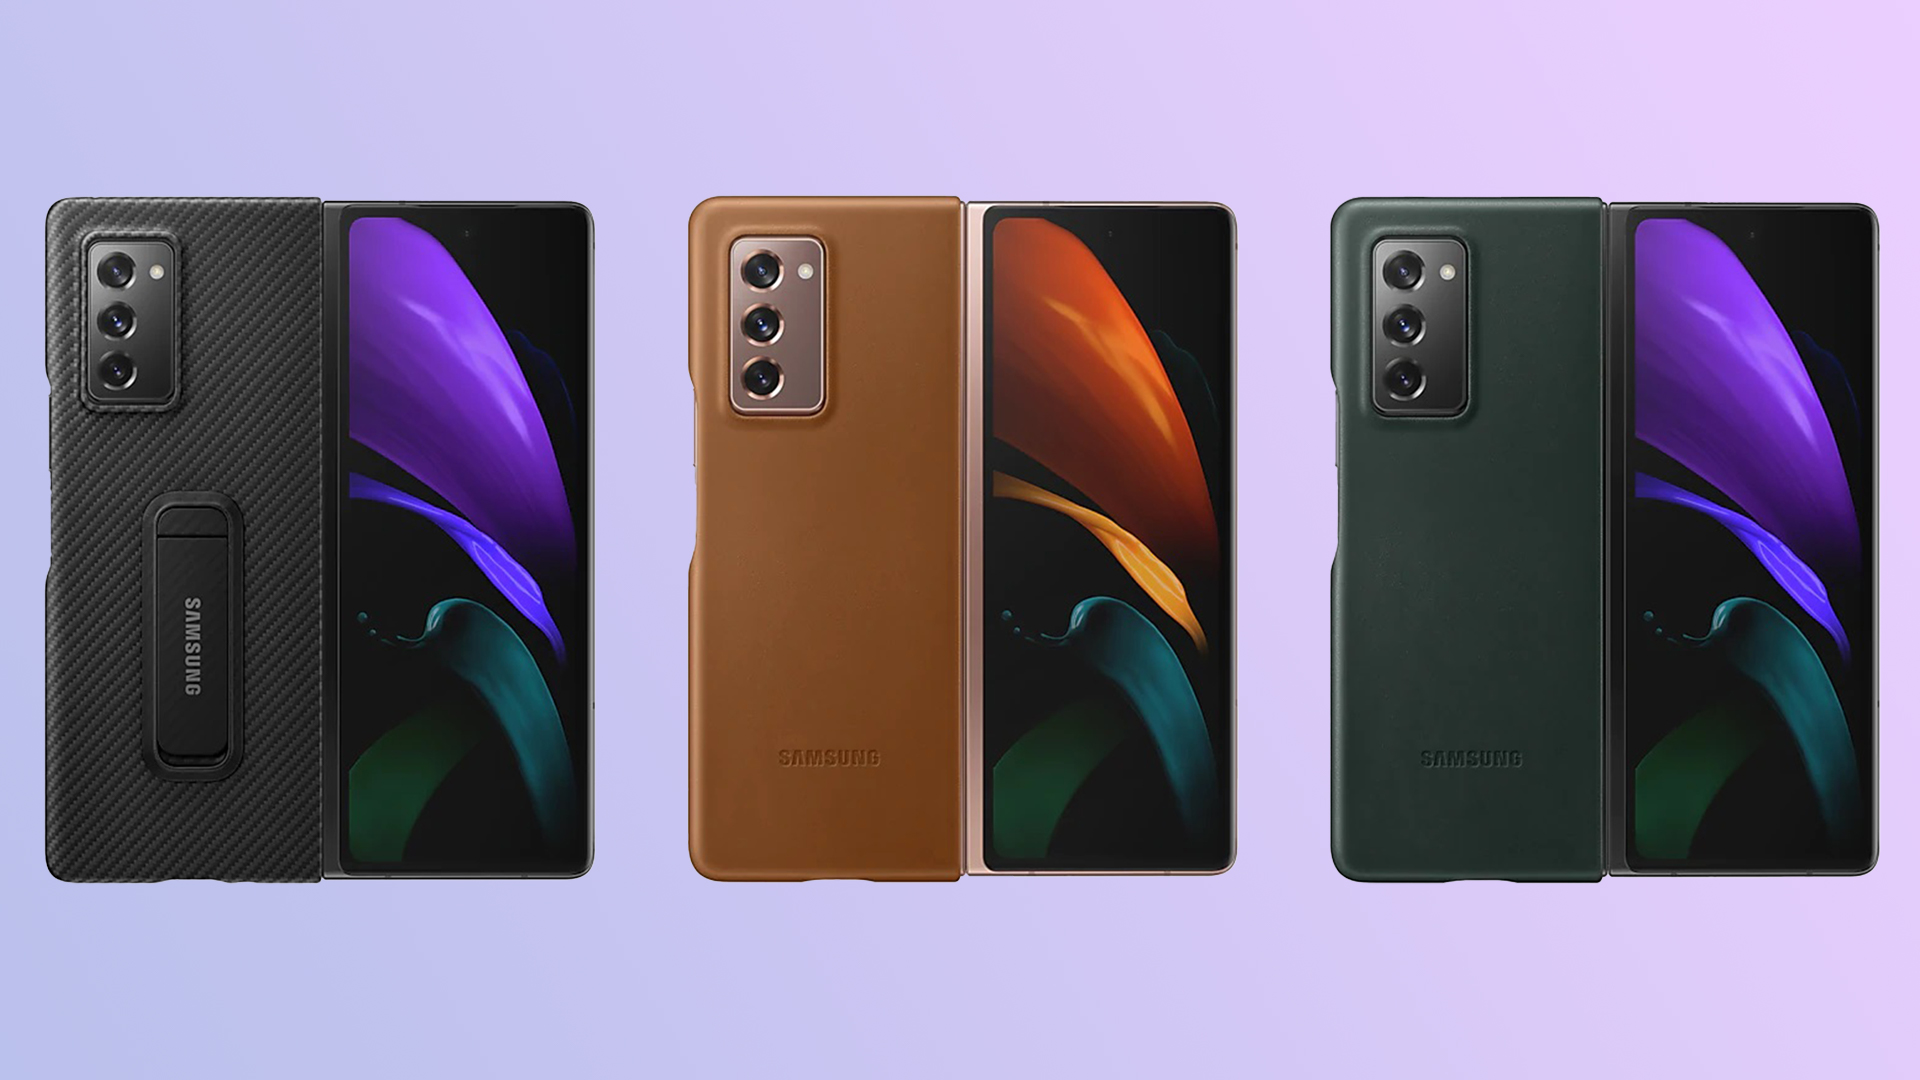 Samsung Galaxy Z Fold 2 With Flexible Display Launched Recently